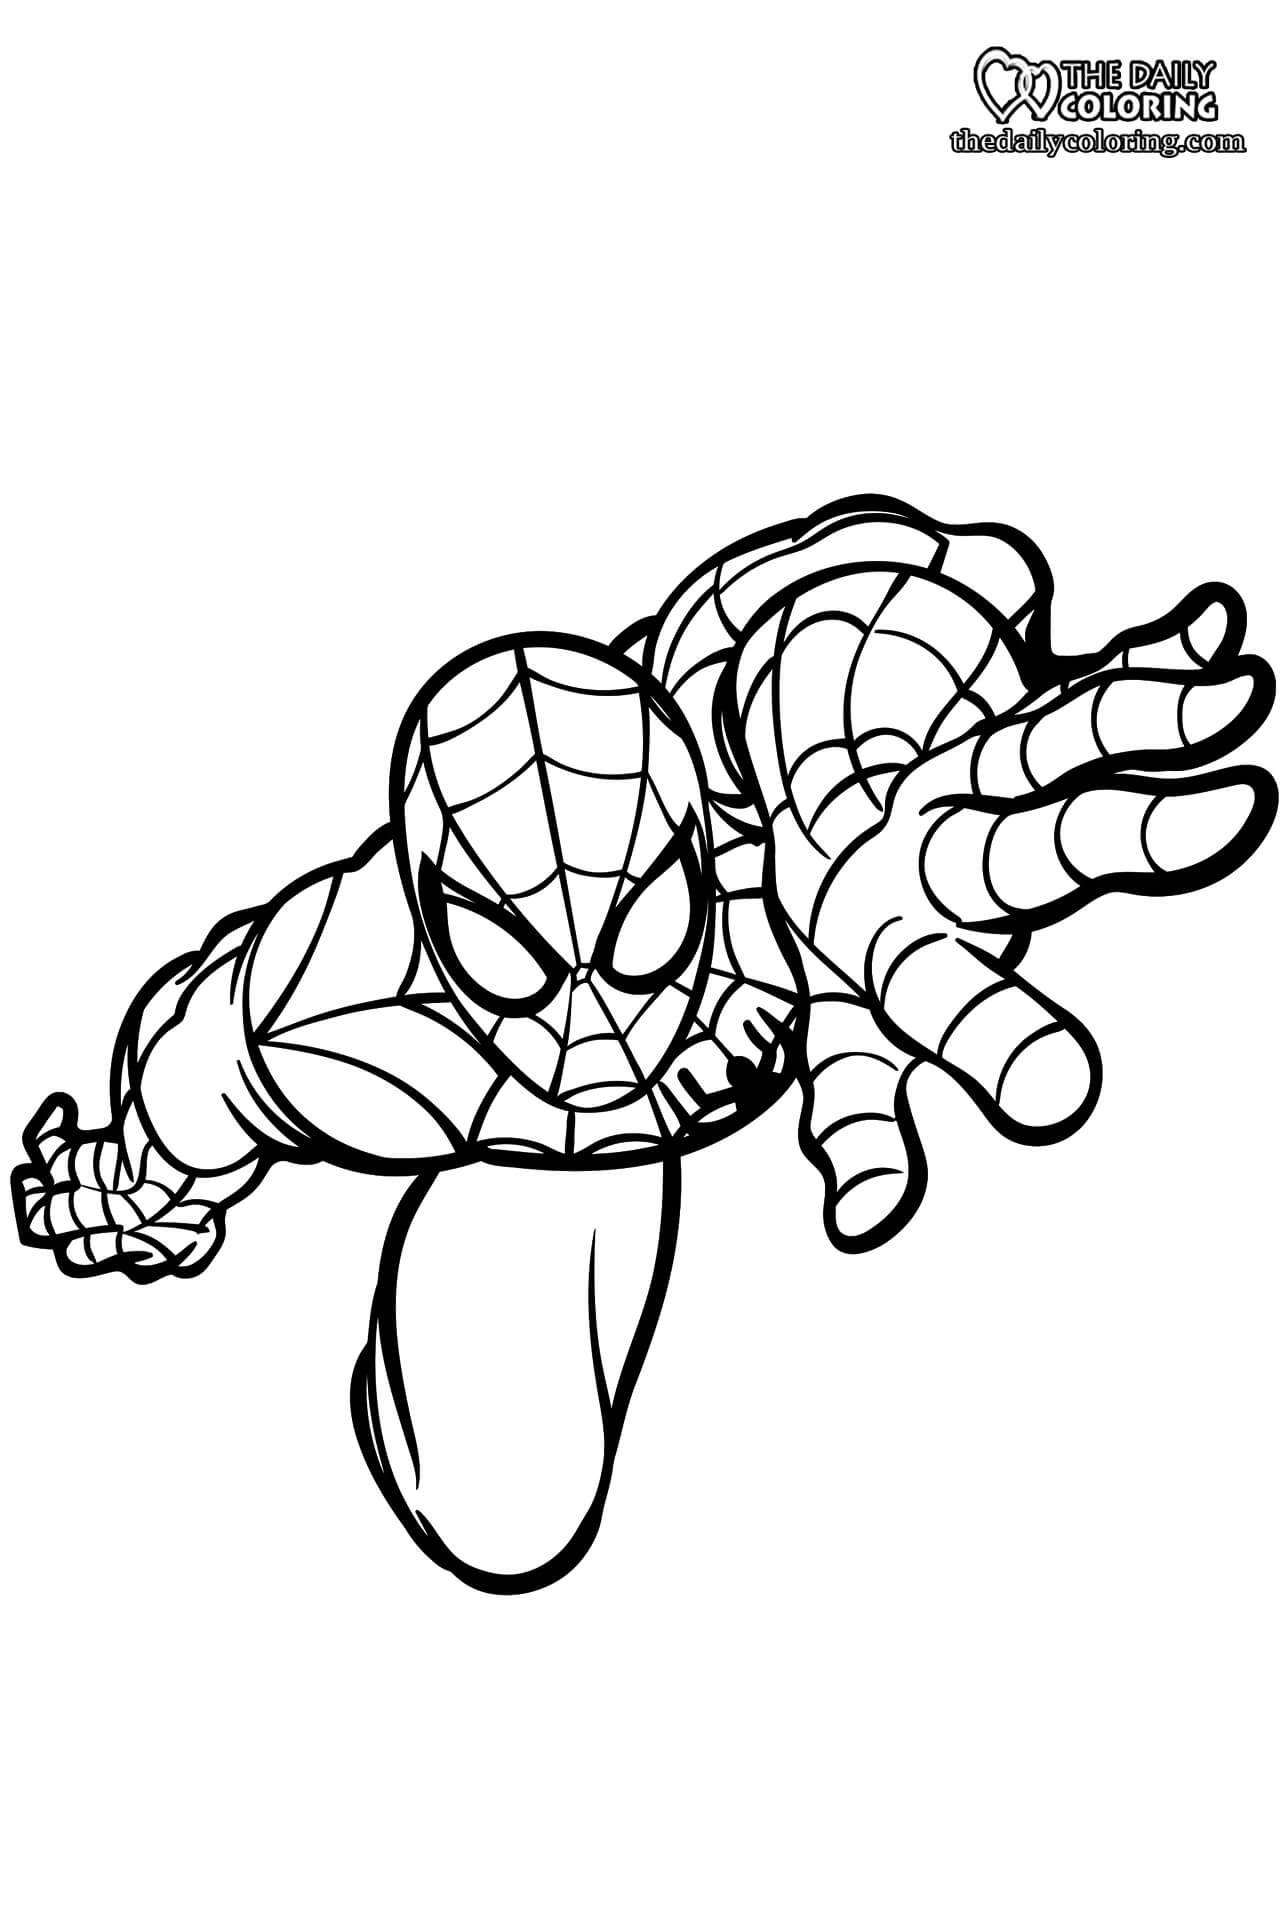 Spiderman Coloring Pages 20+ FULL HD   The Daily Coloring